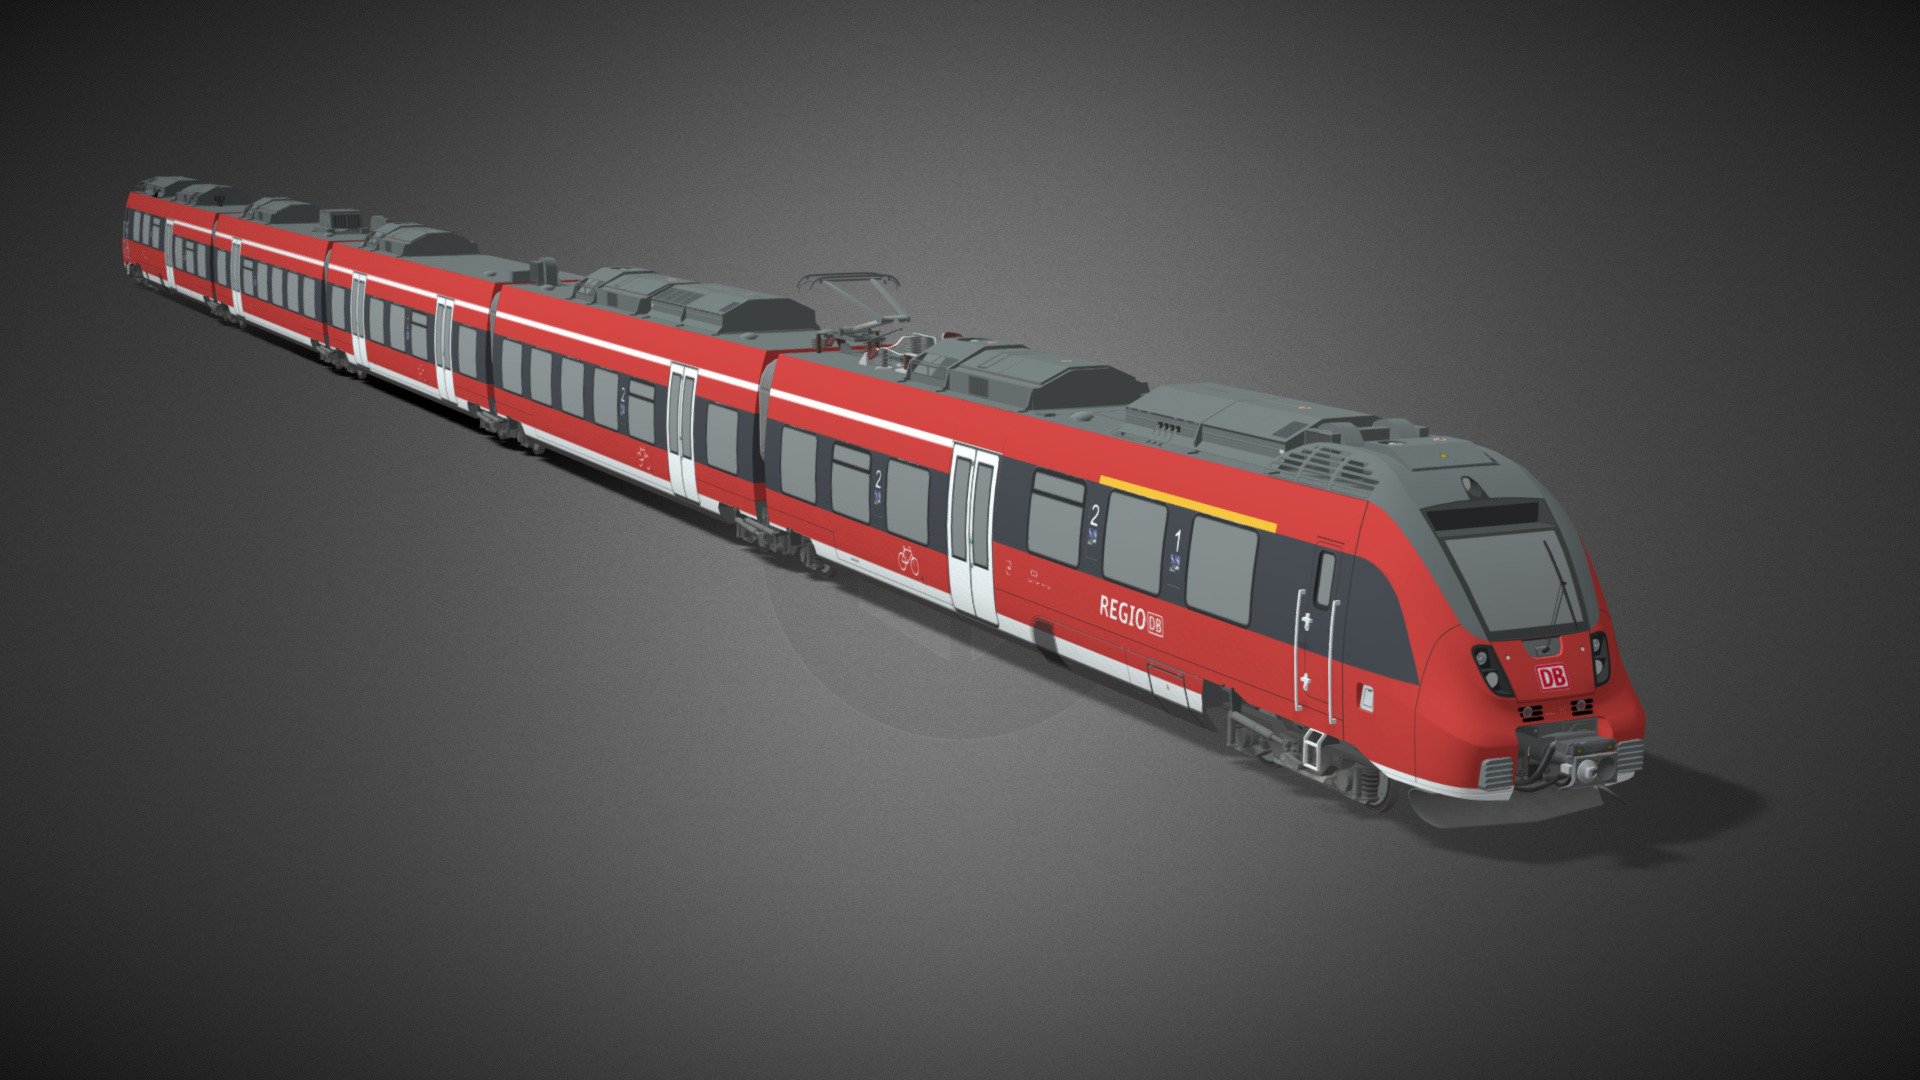 Bombardier Talent 2 in DB Regio livery. This model was originally made as an asset for the game Cities: Skylines. There are simplifications to the texture and model to keep it optimised for the game.

This model includes a 5-car variant of the Talent 2 3d model